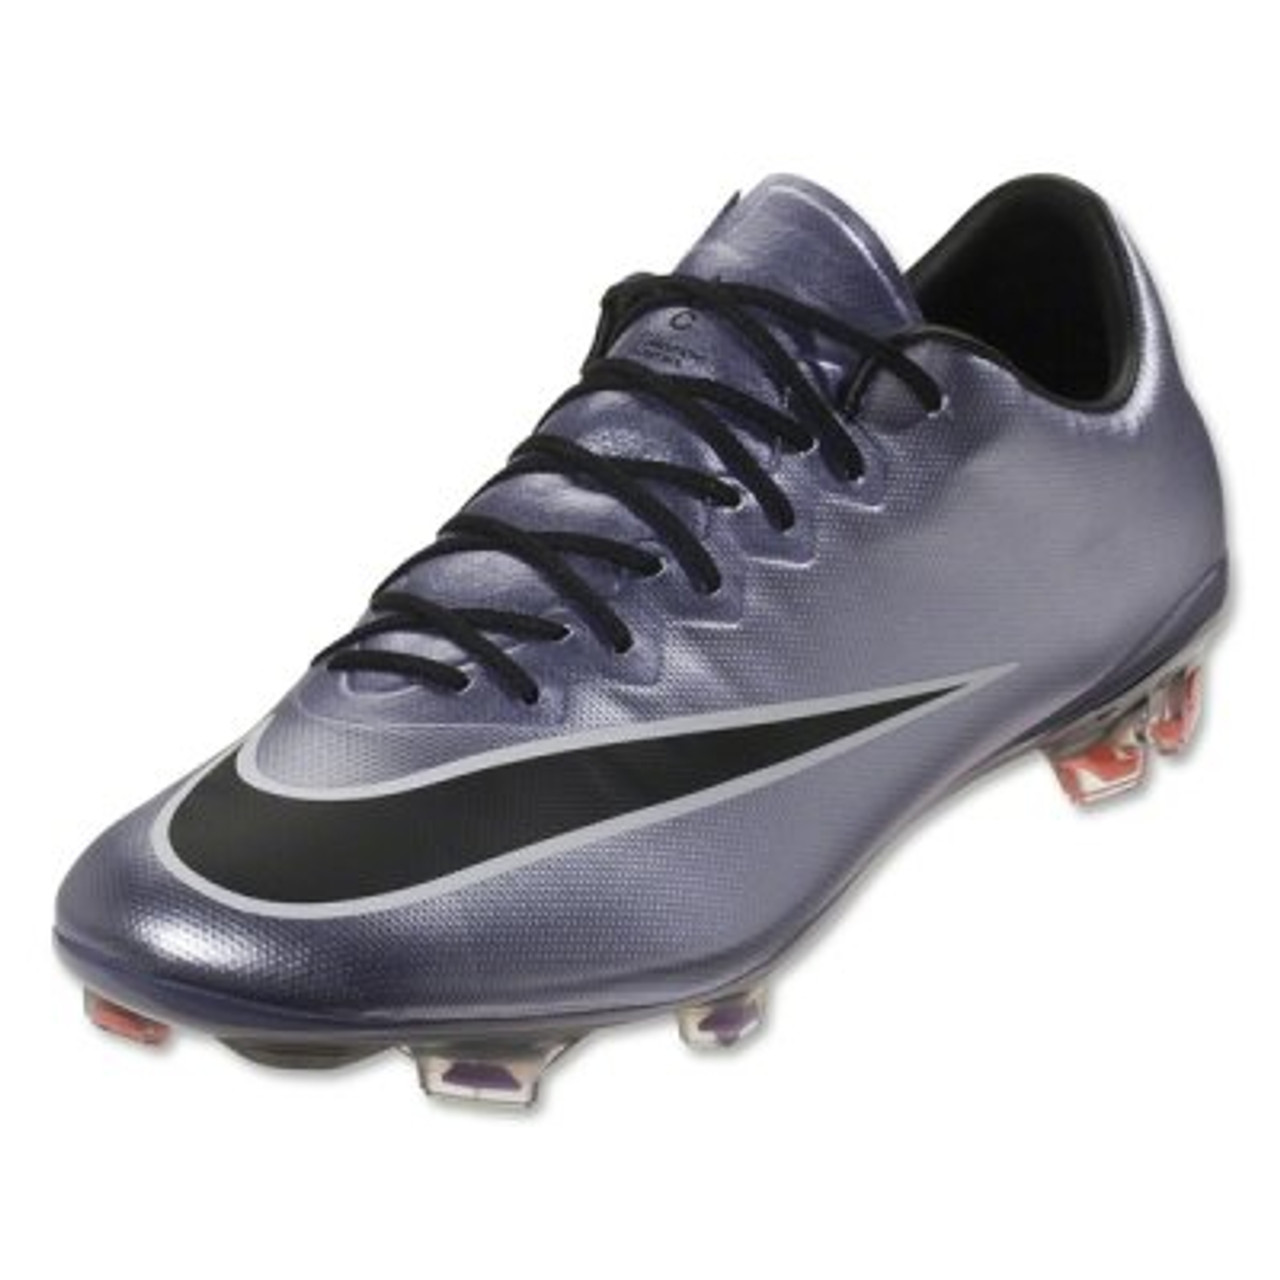 Nike's Mercurial Vapor IV Who Is The Fastest Sportslens